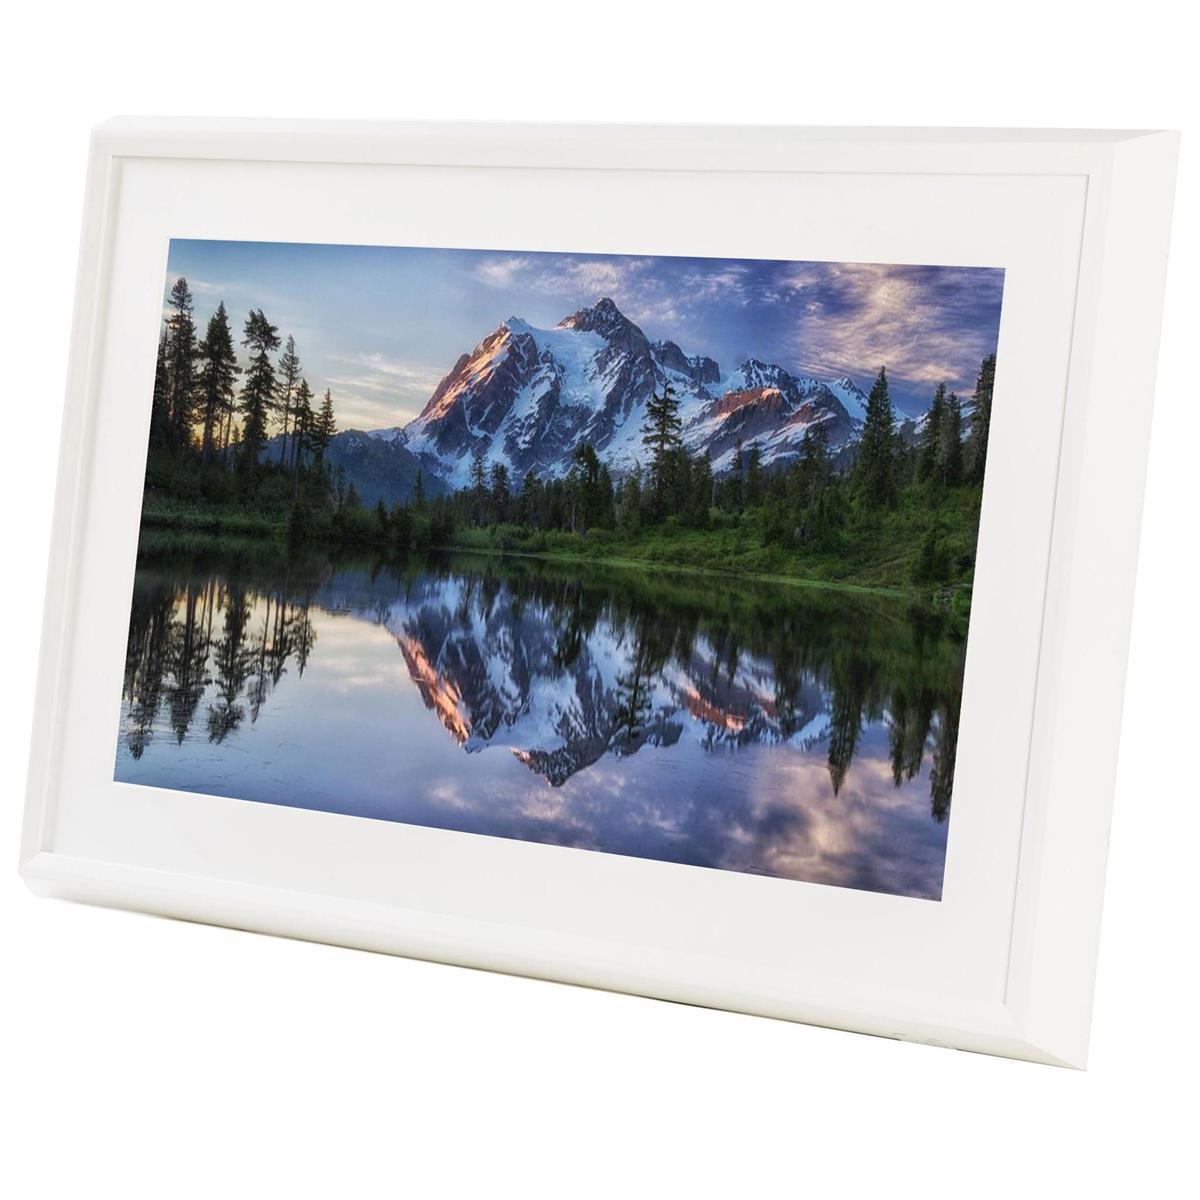 27in Meural Canvas Leonora LCD WiFi Digital White Photo Frame for $295 Shipped